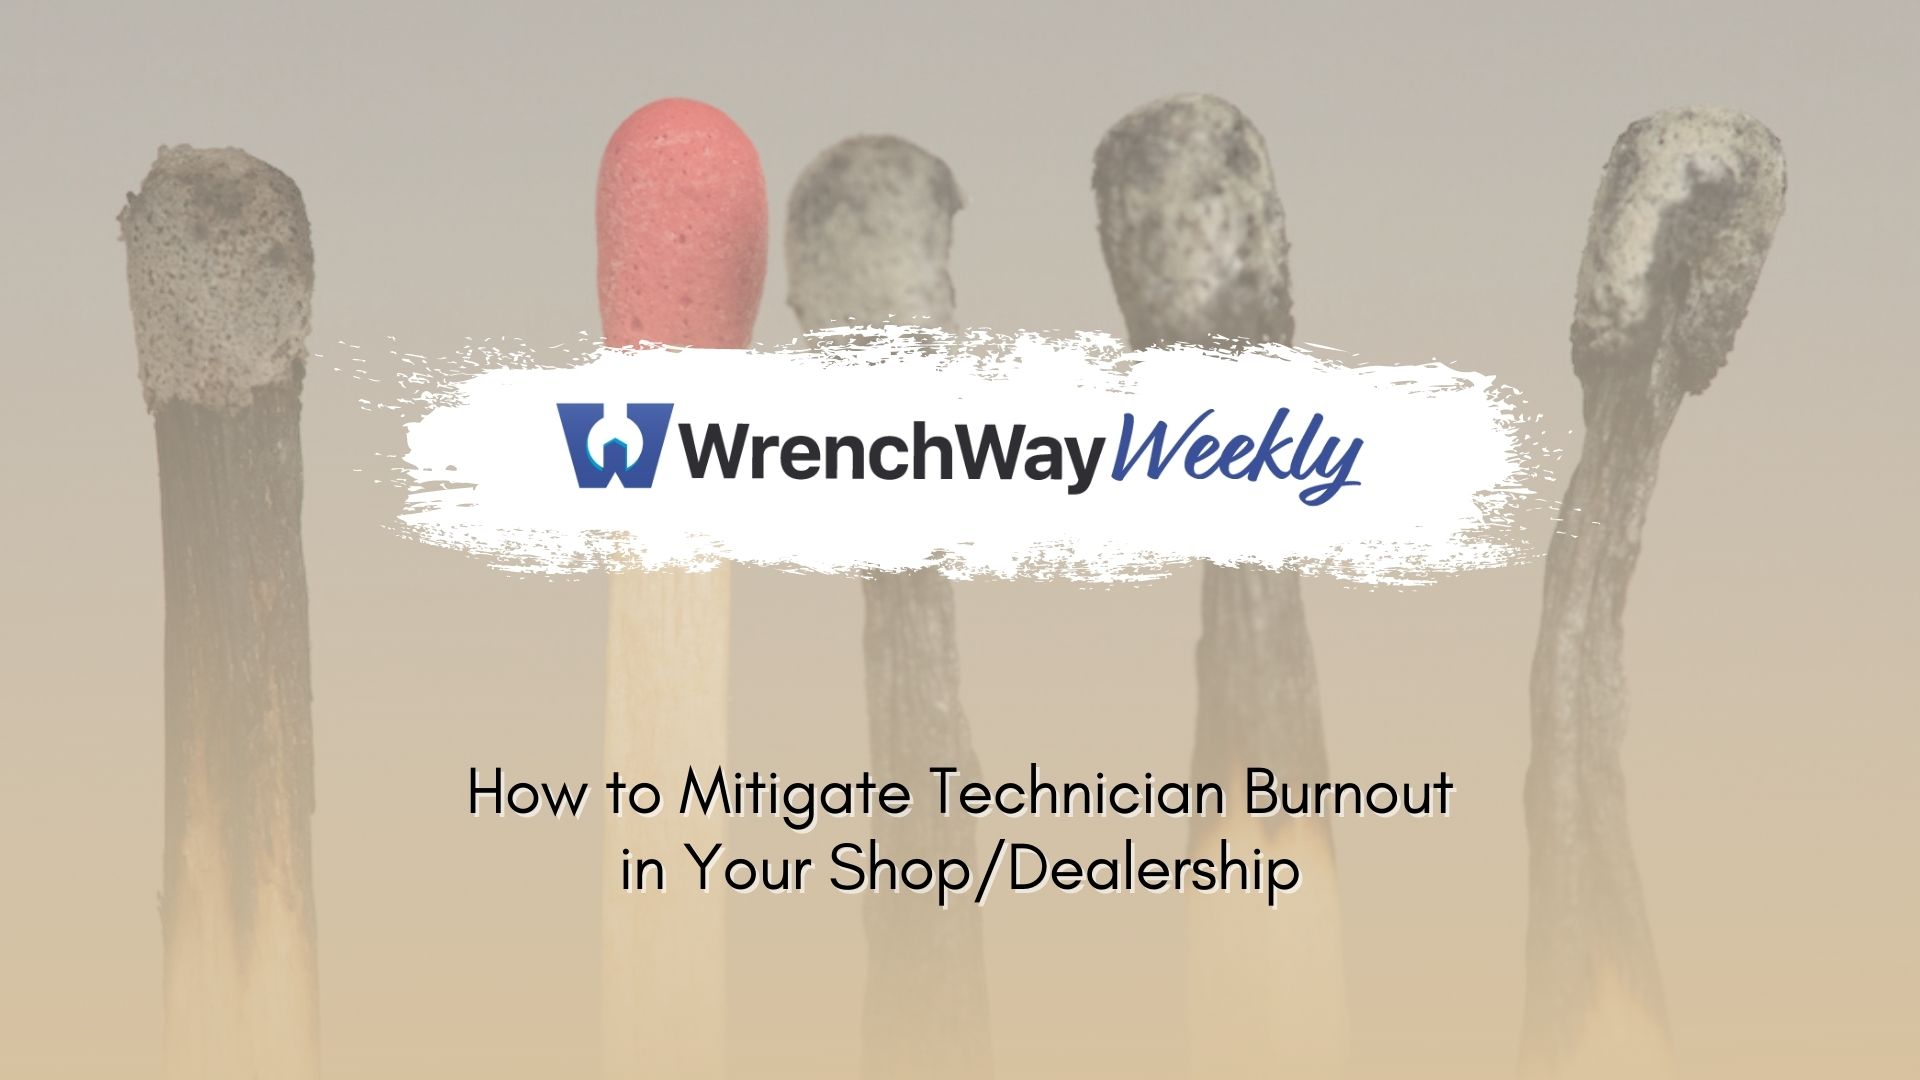 WrenchWay weekly episode on mitigating technician burnout in your shop or dealership